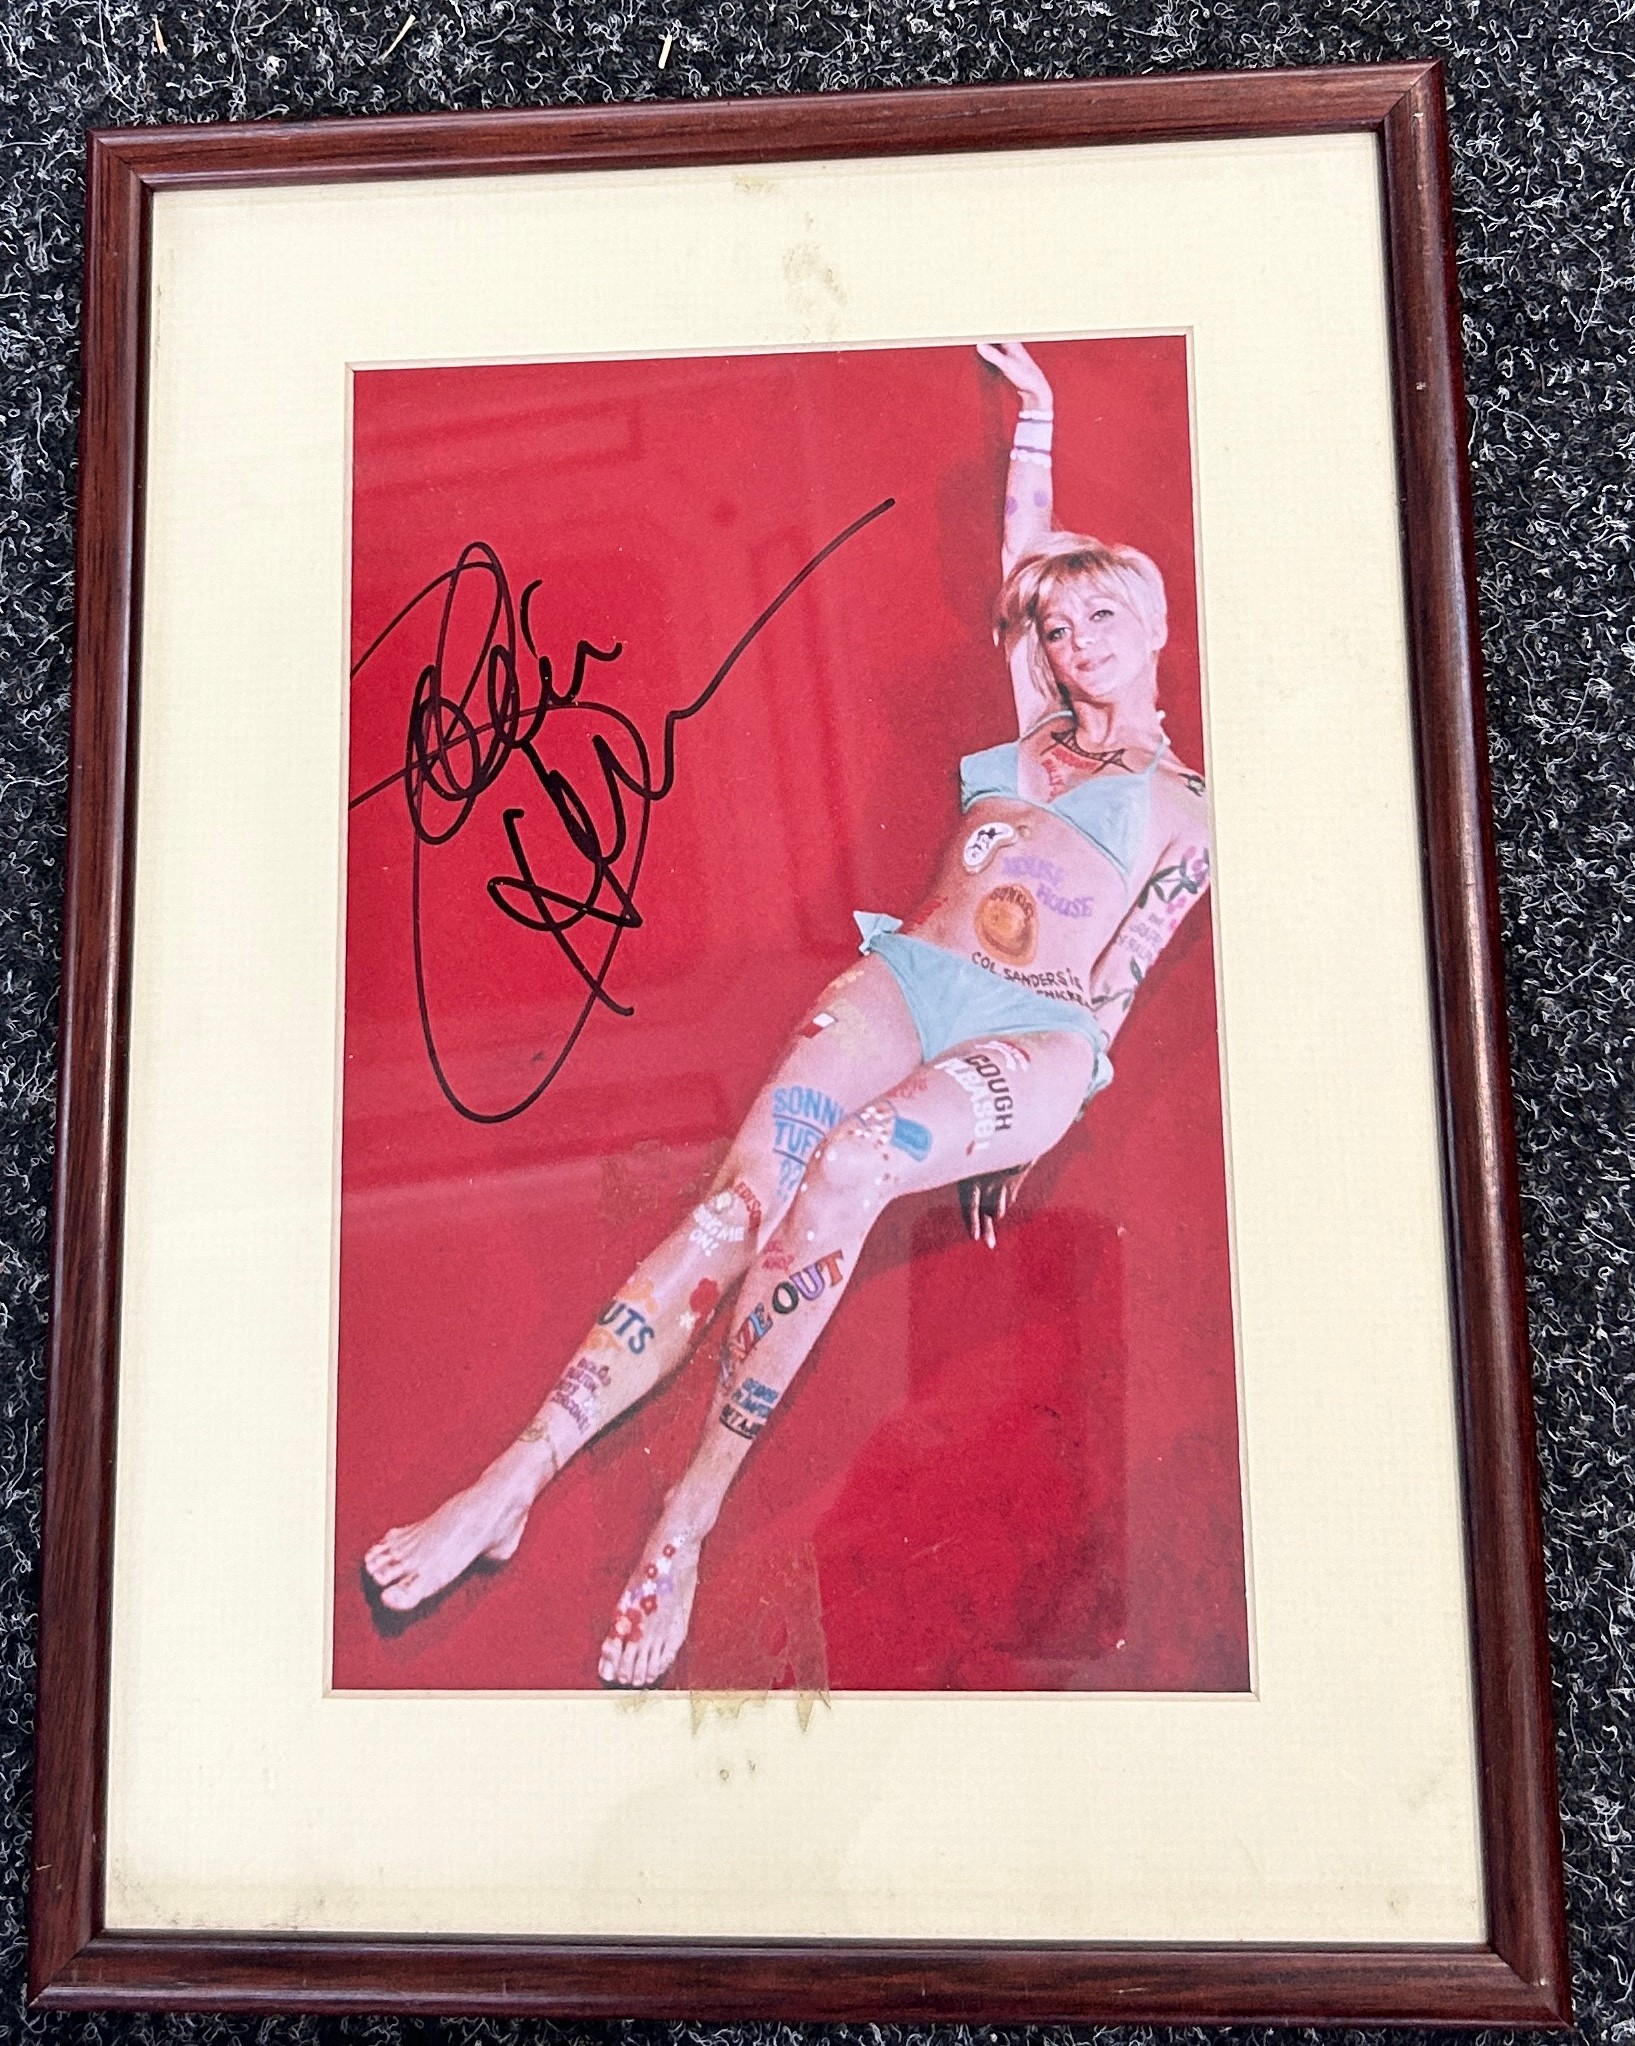 Authentic framed signed autograph by Kate Beckinsale, Uma Thurman, Goldie Hawn, approximate frame - Image 4 of 5